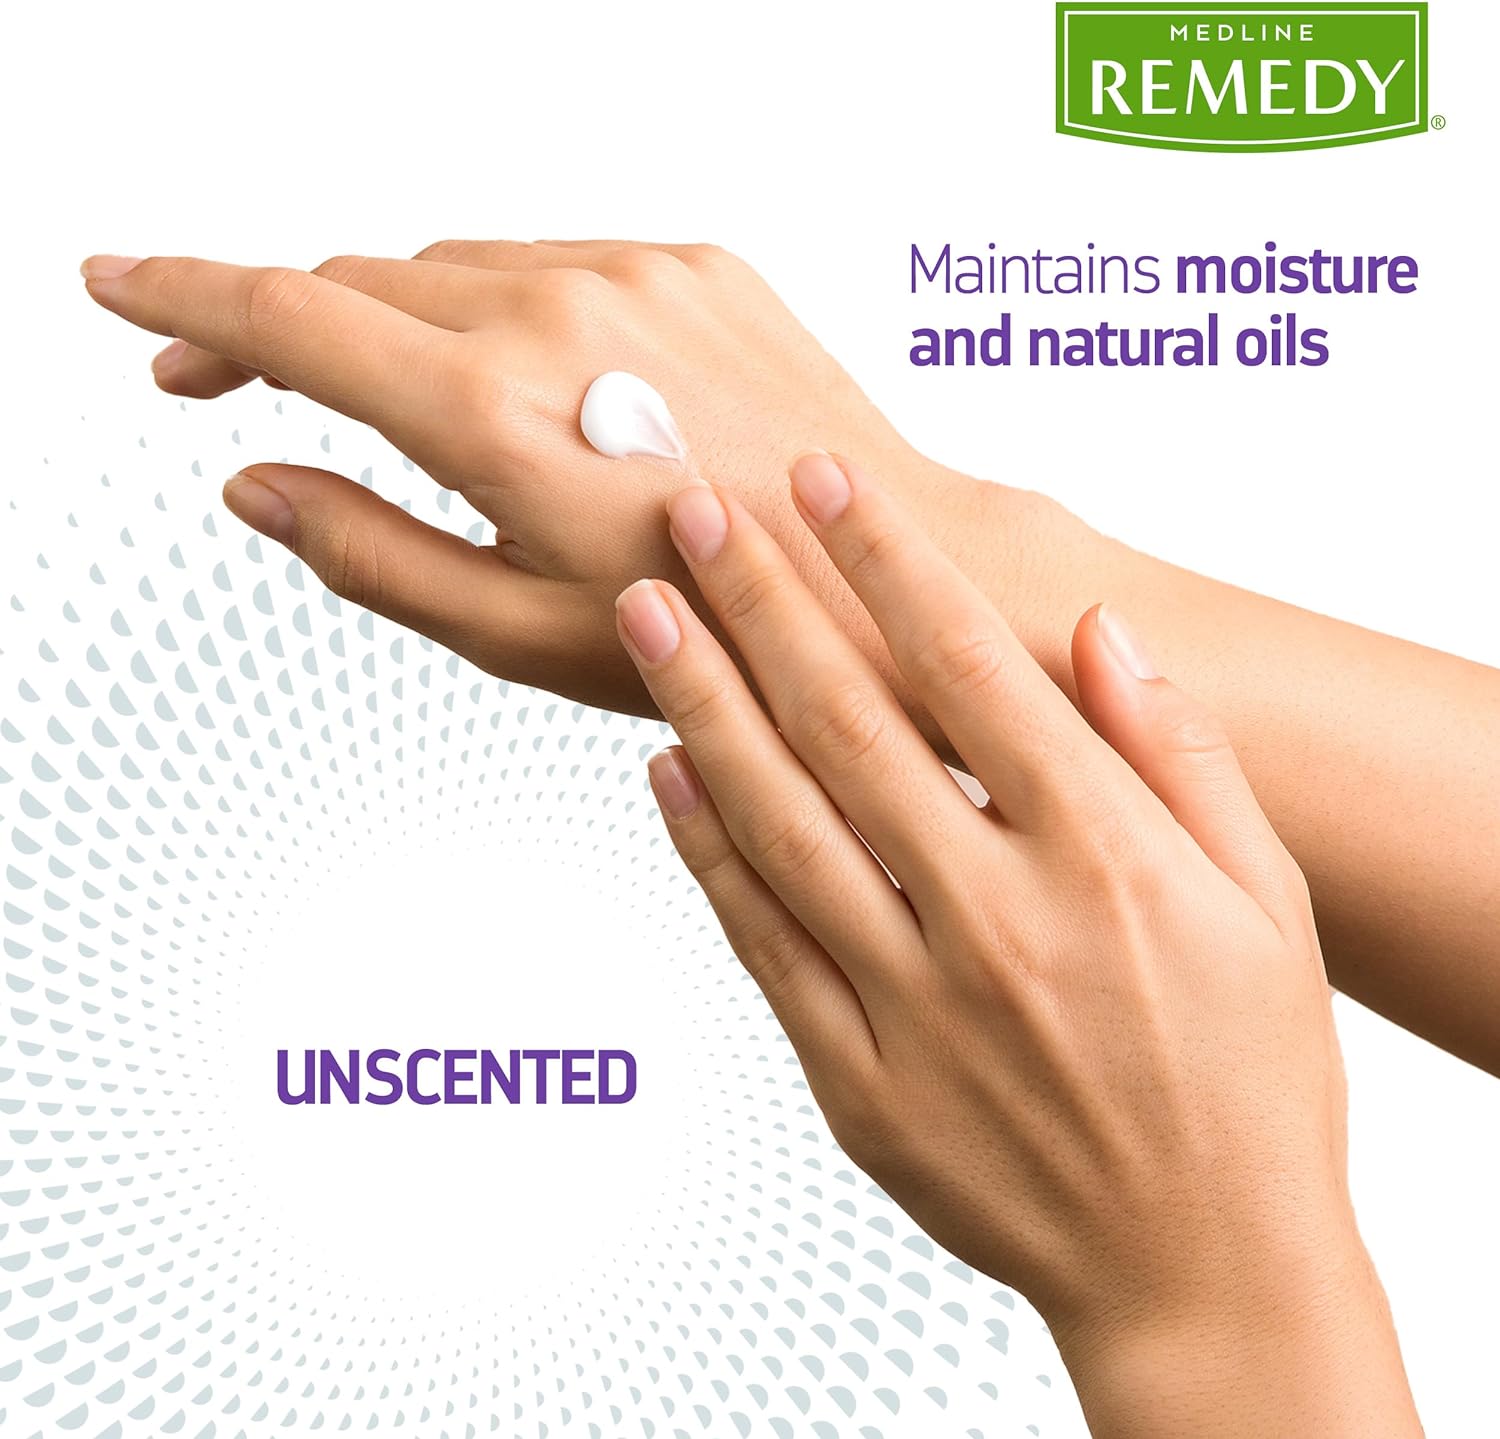 Medline Remedy Clinical Skin Cream Moisturizer, Fragrance-Free (8 fl oz), Nourishing for Dry Skin, Paraben and Sulfate-Free Lotion For Face and Body, Hypoallergenic Moisturizer for Sensitive Skin : Beauty & Personal Care